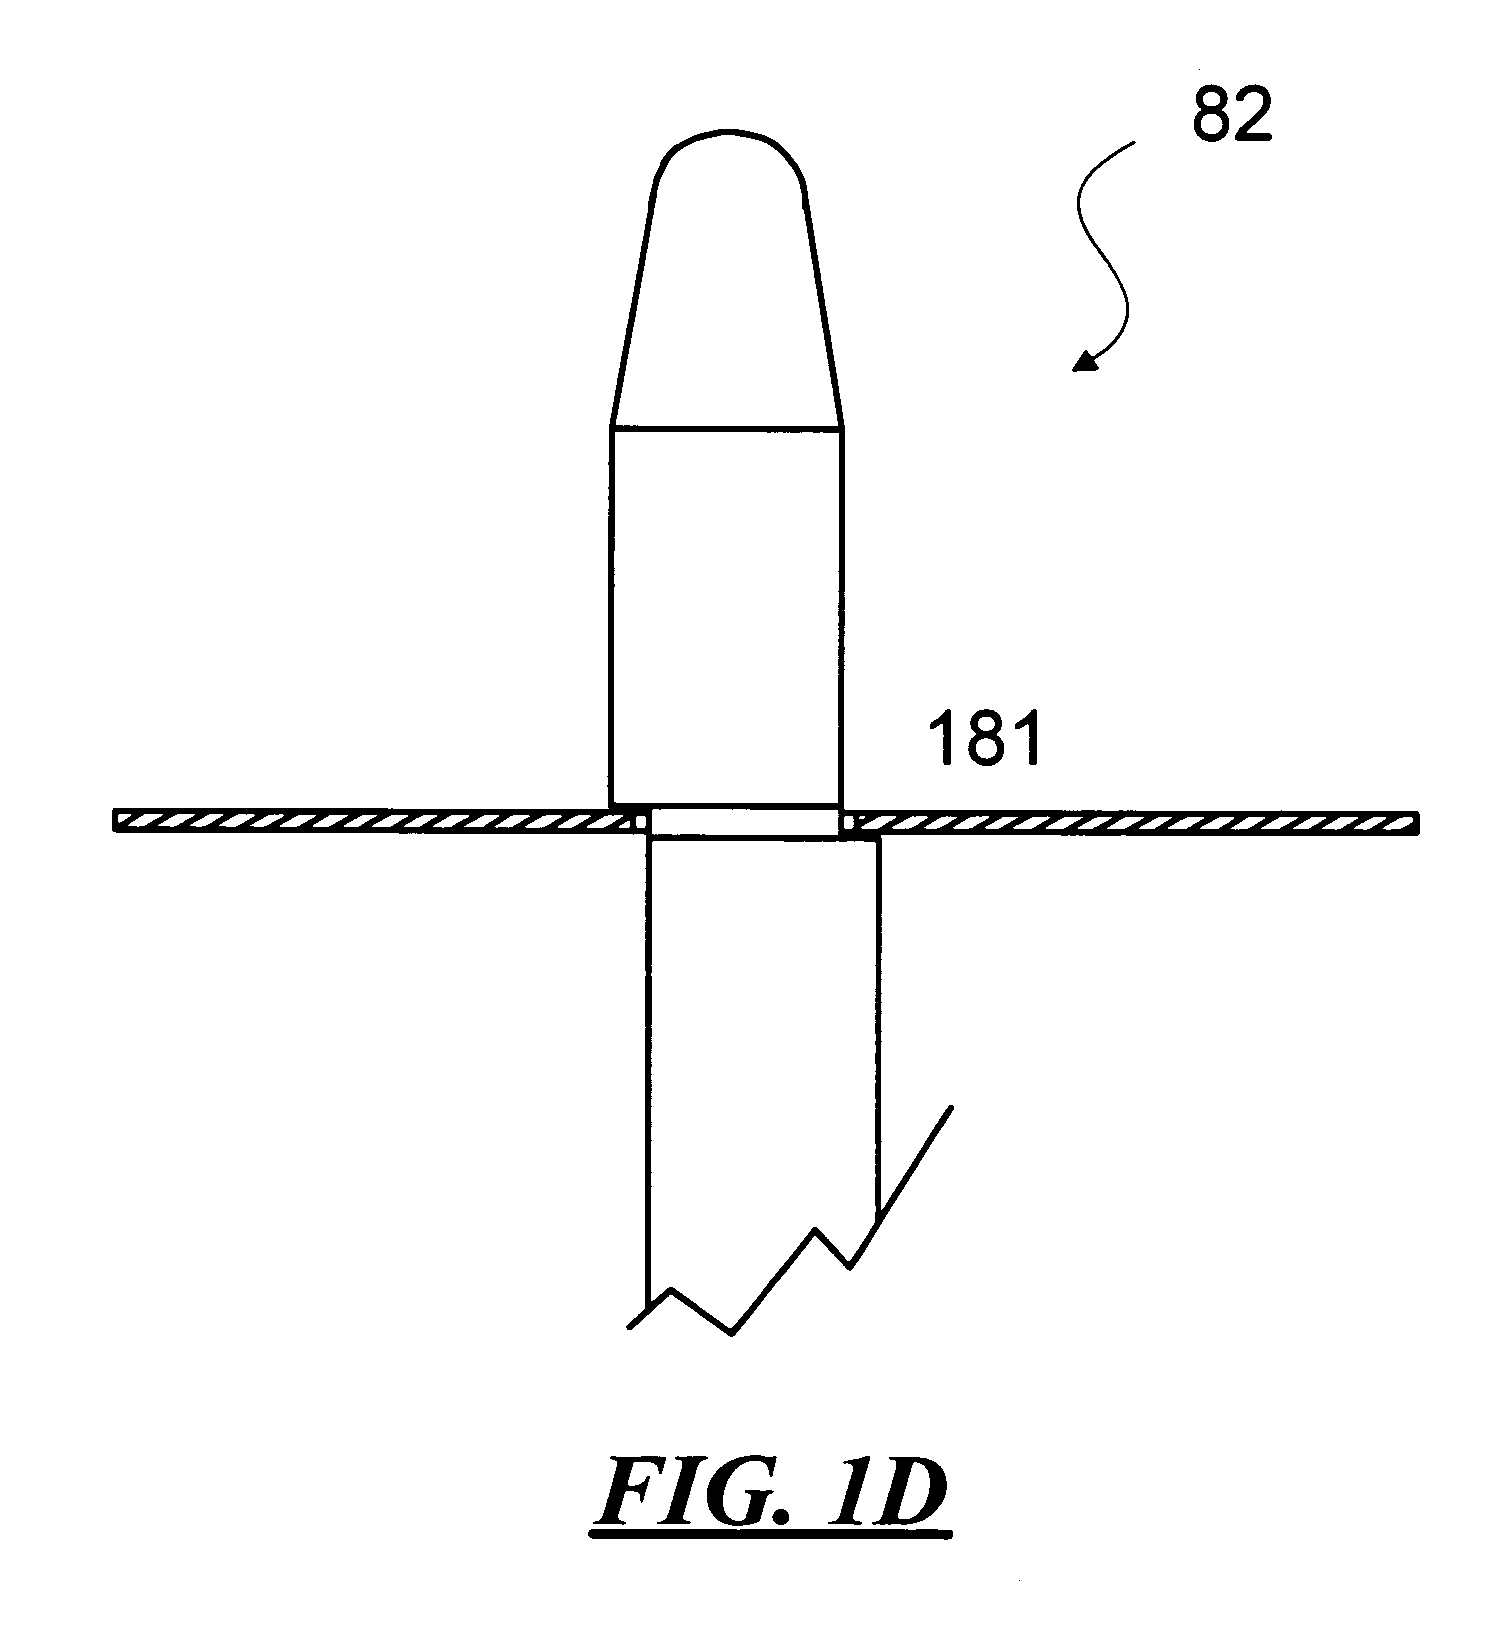 Integrated disc inspection and repair apparatus and appertaining method